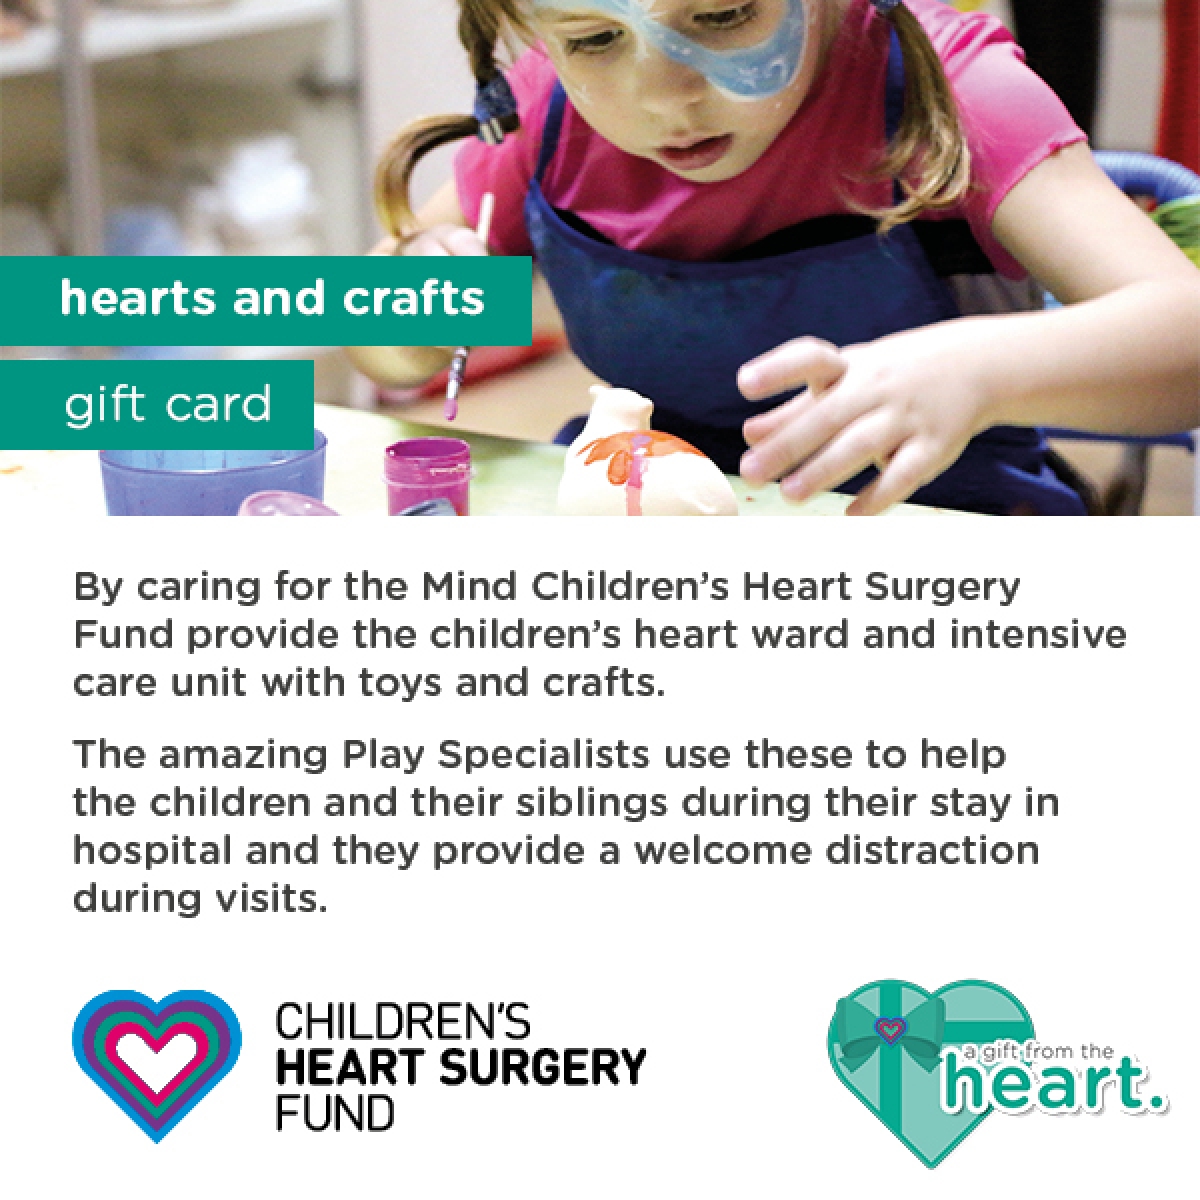 Send a gift from the heart for £20 eCards